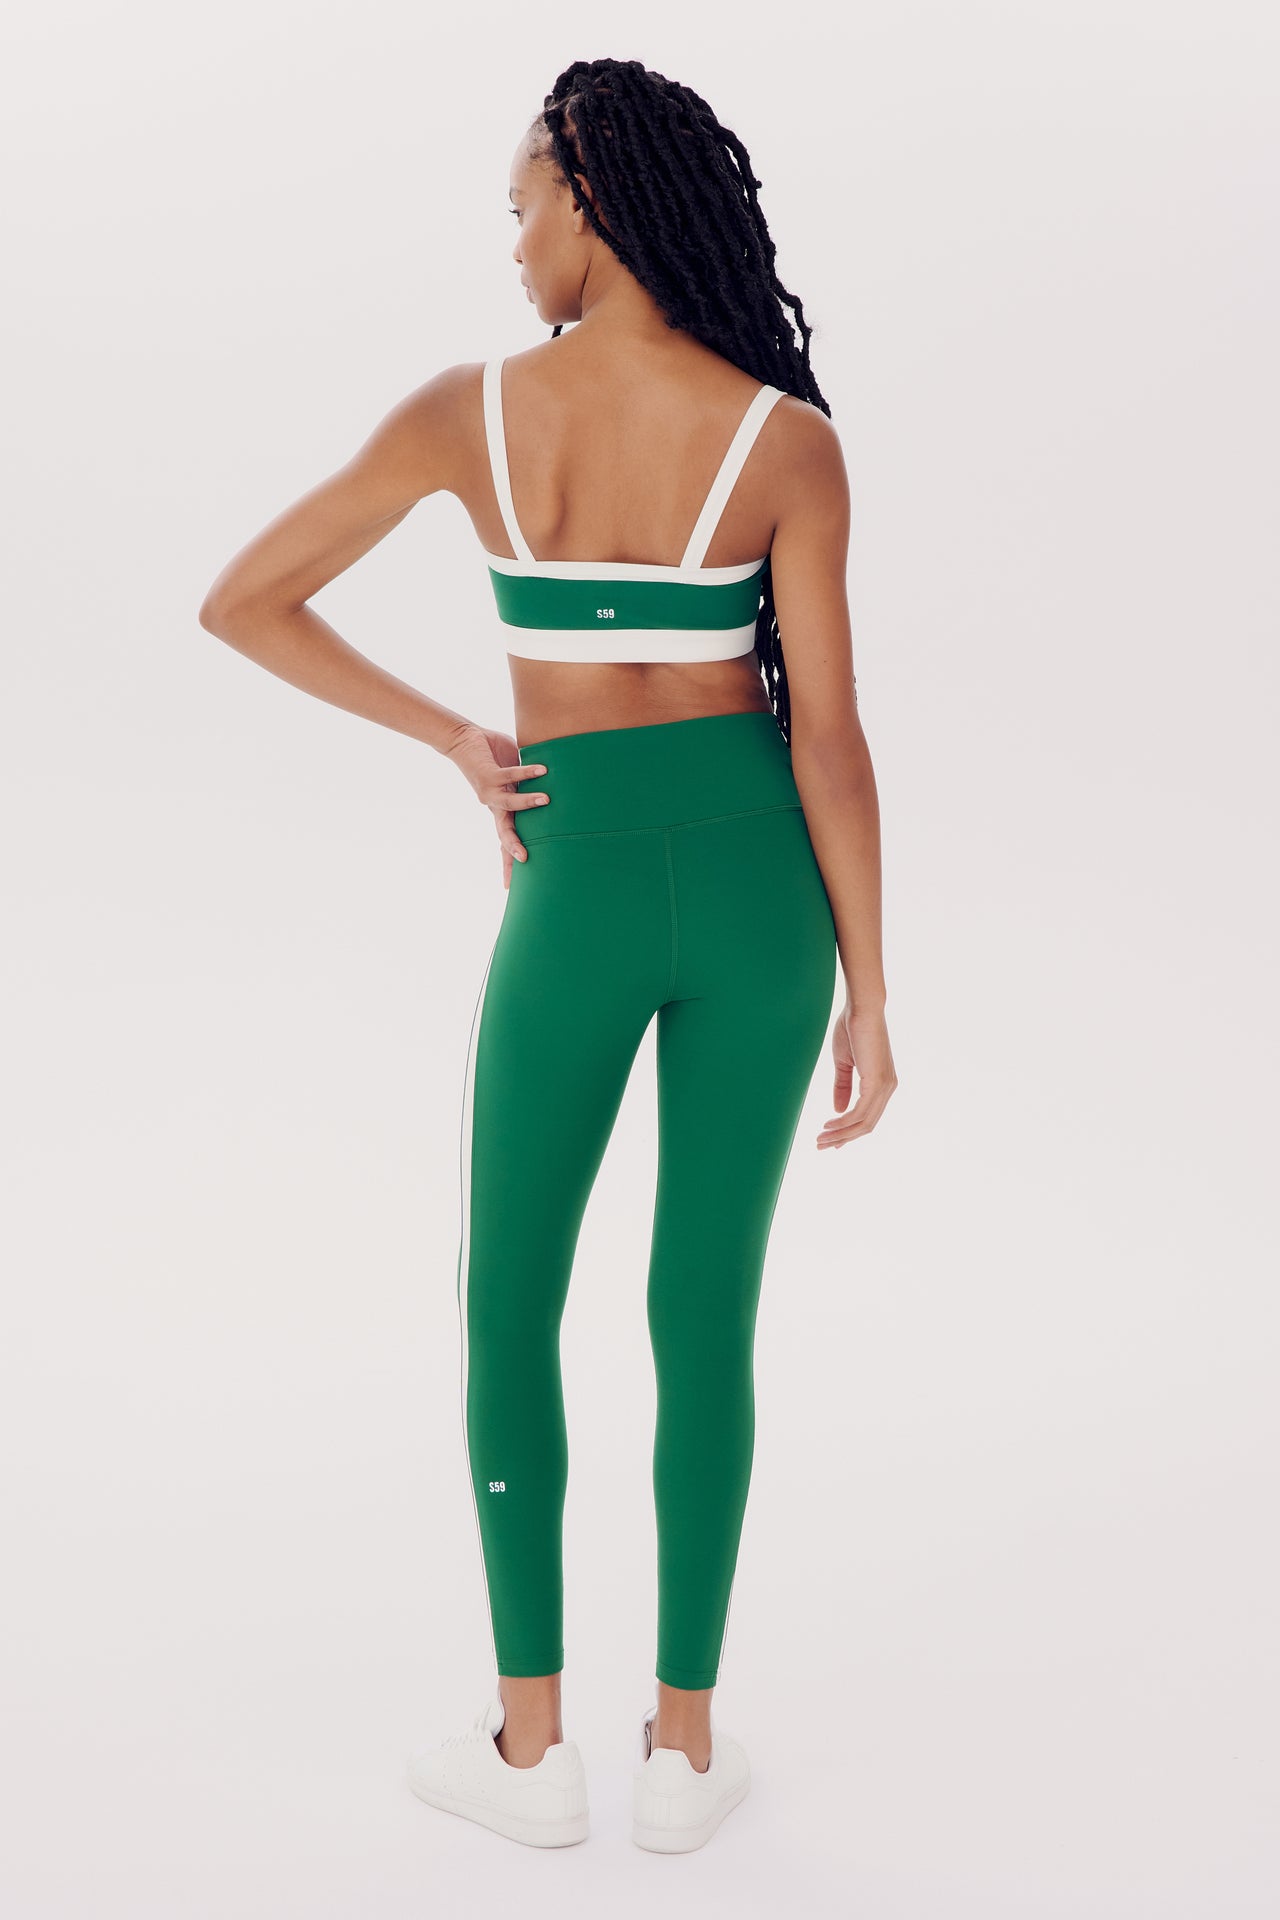 Woman in Clare High Waist Rigor 7/8 - Arugula/White and green sports bra standing with her back to the camera, looking over her shoulder, against a white background by SPLITS59.